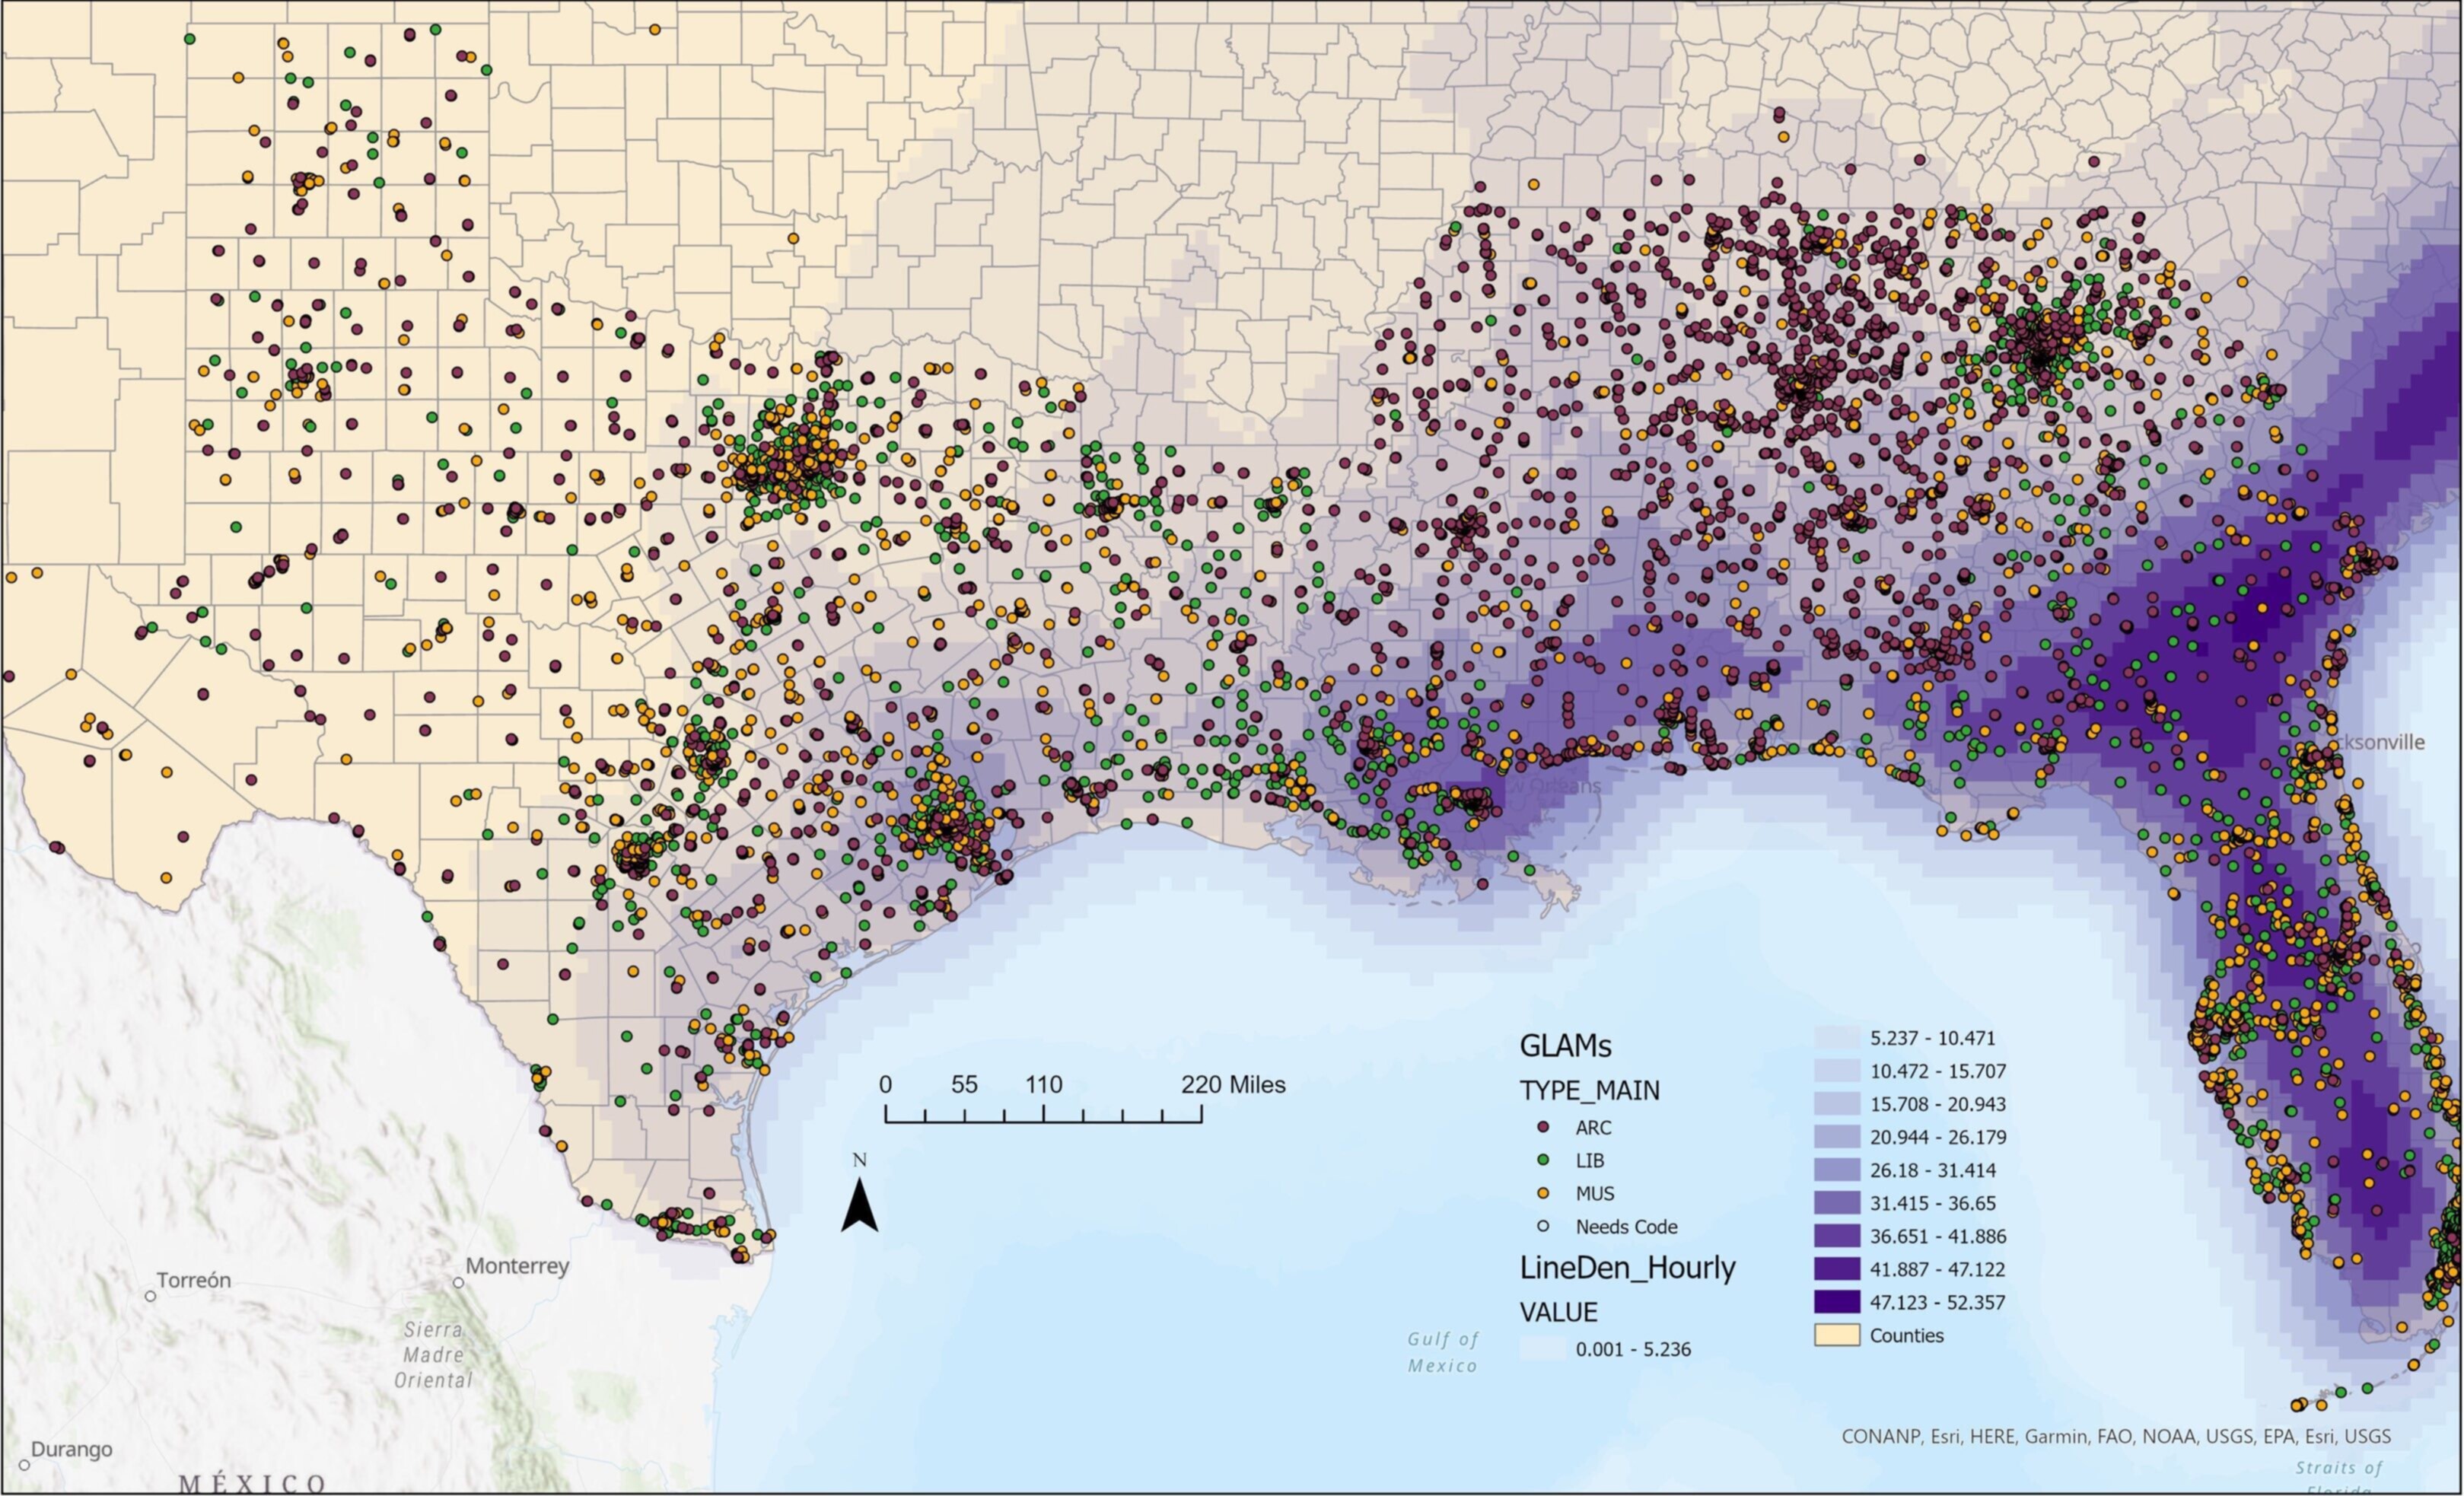 LSU RESEARCHERS PUBLISH GEOLOCATION DATASET OF ALL U.S. GALLERIES, LIBRARIES, ARCHIVES AND MUSEUMS